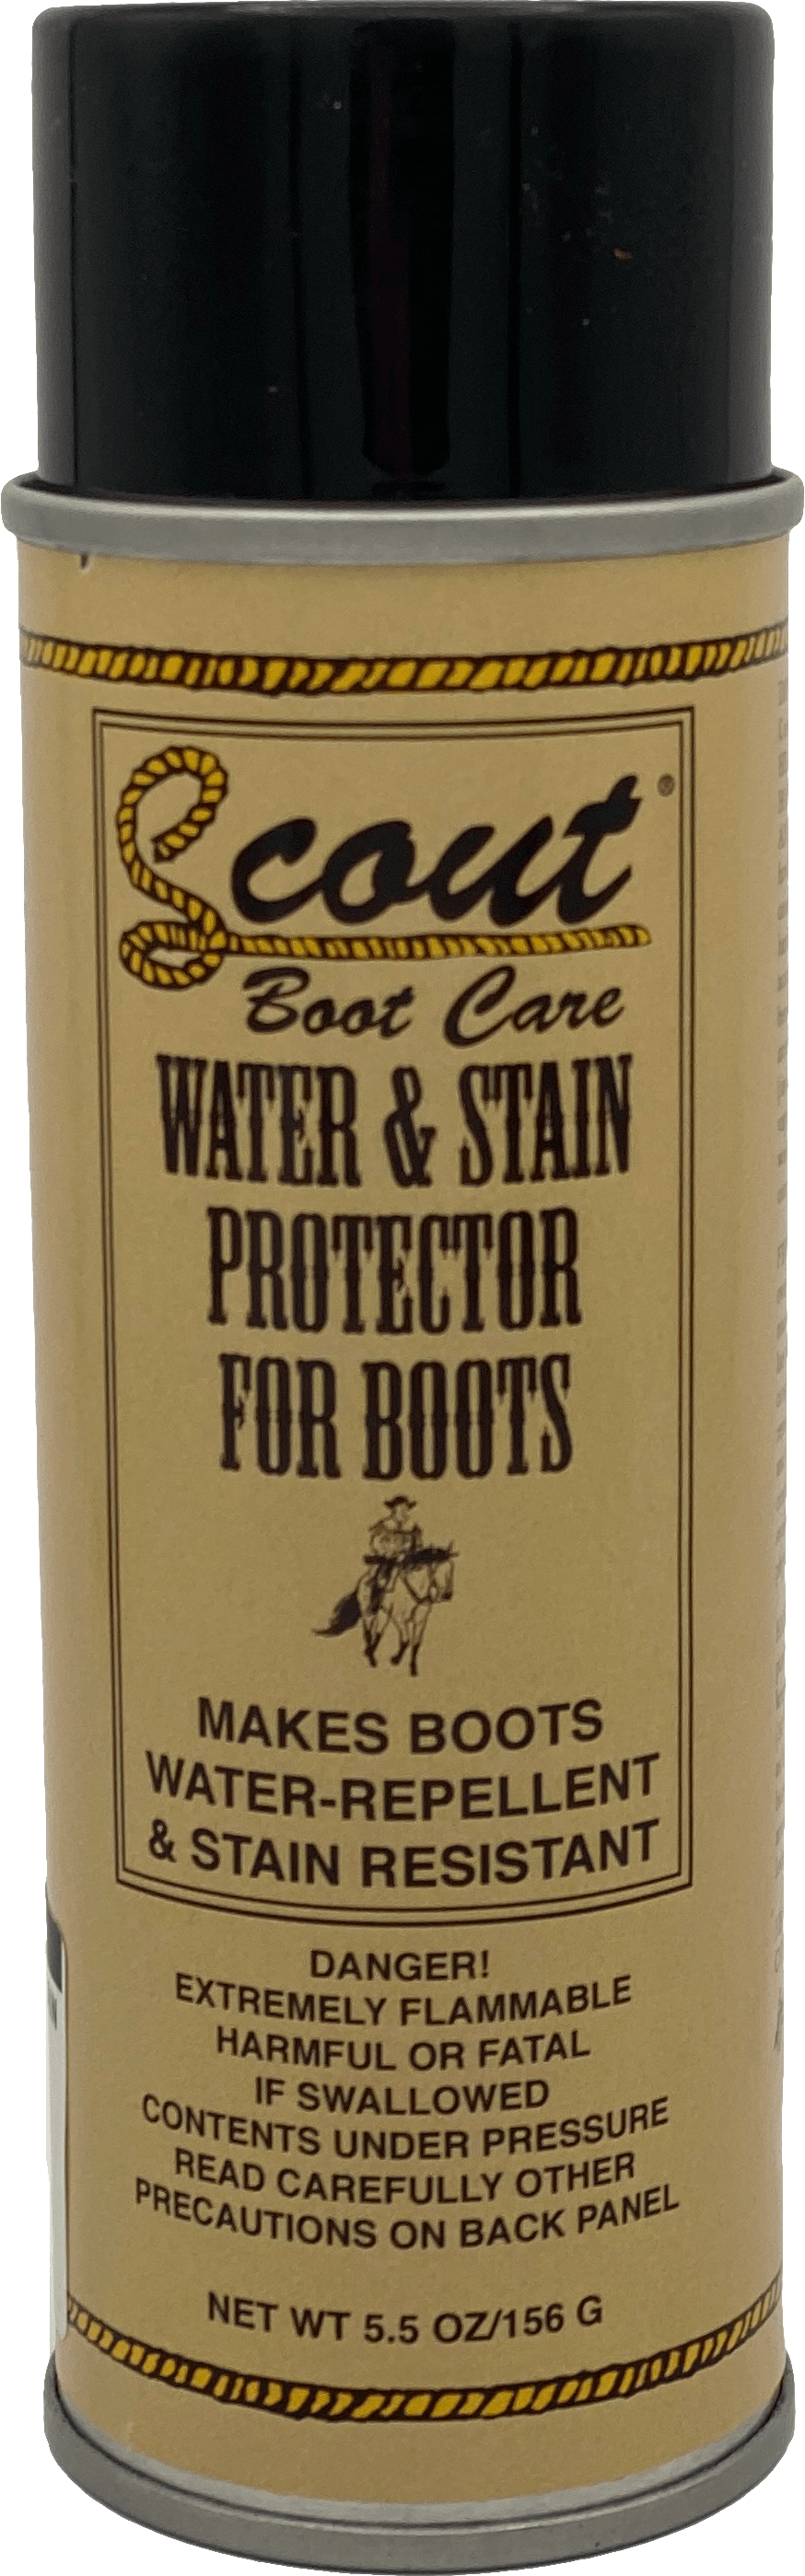 M&F WESTERN Boot Care Scout Water & Stain Protectant Spray - 03601